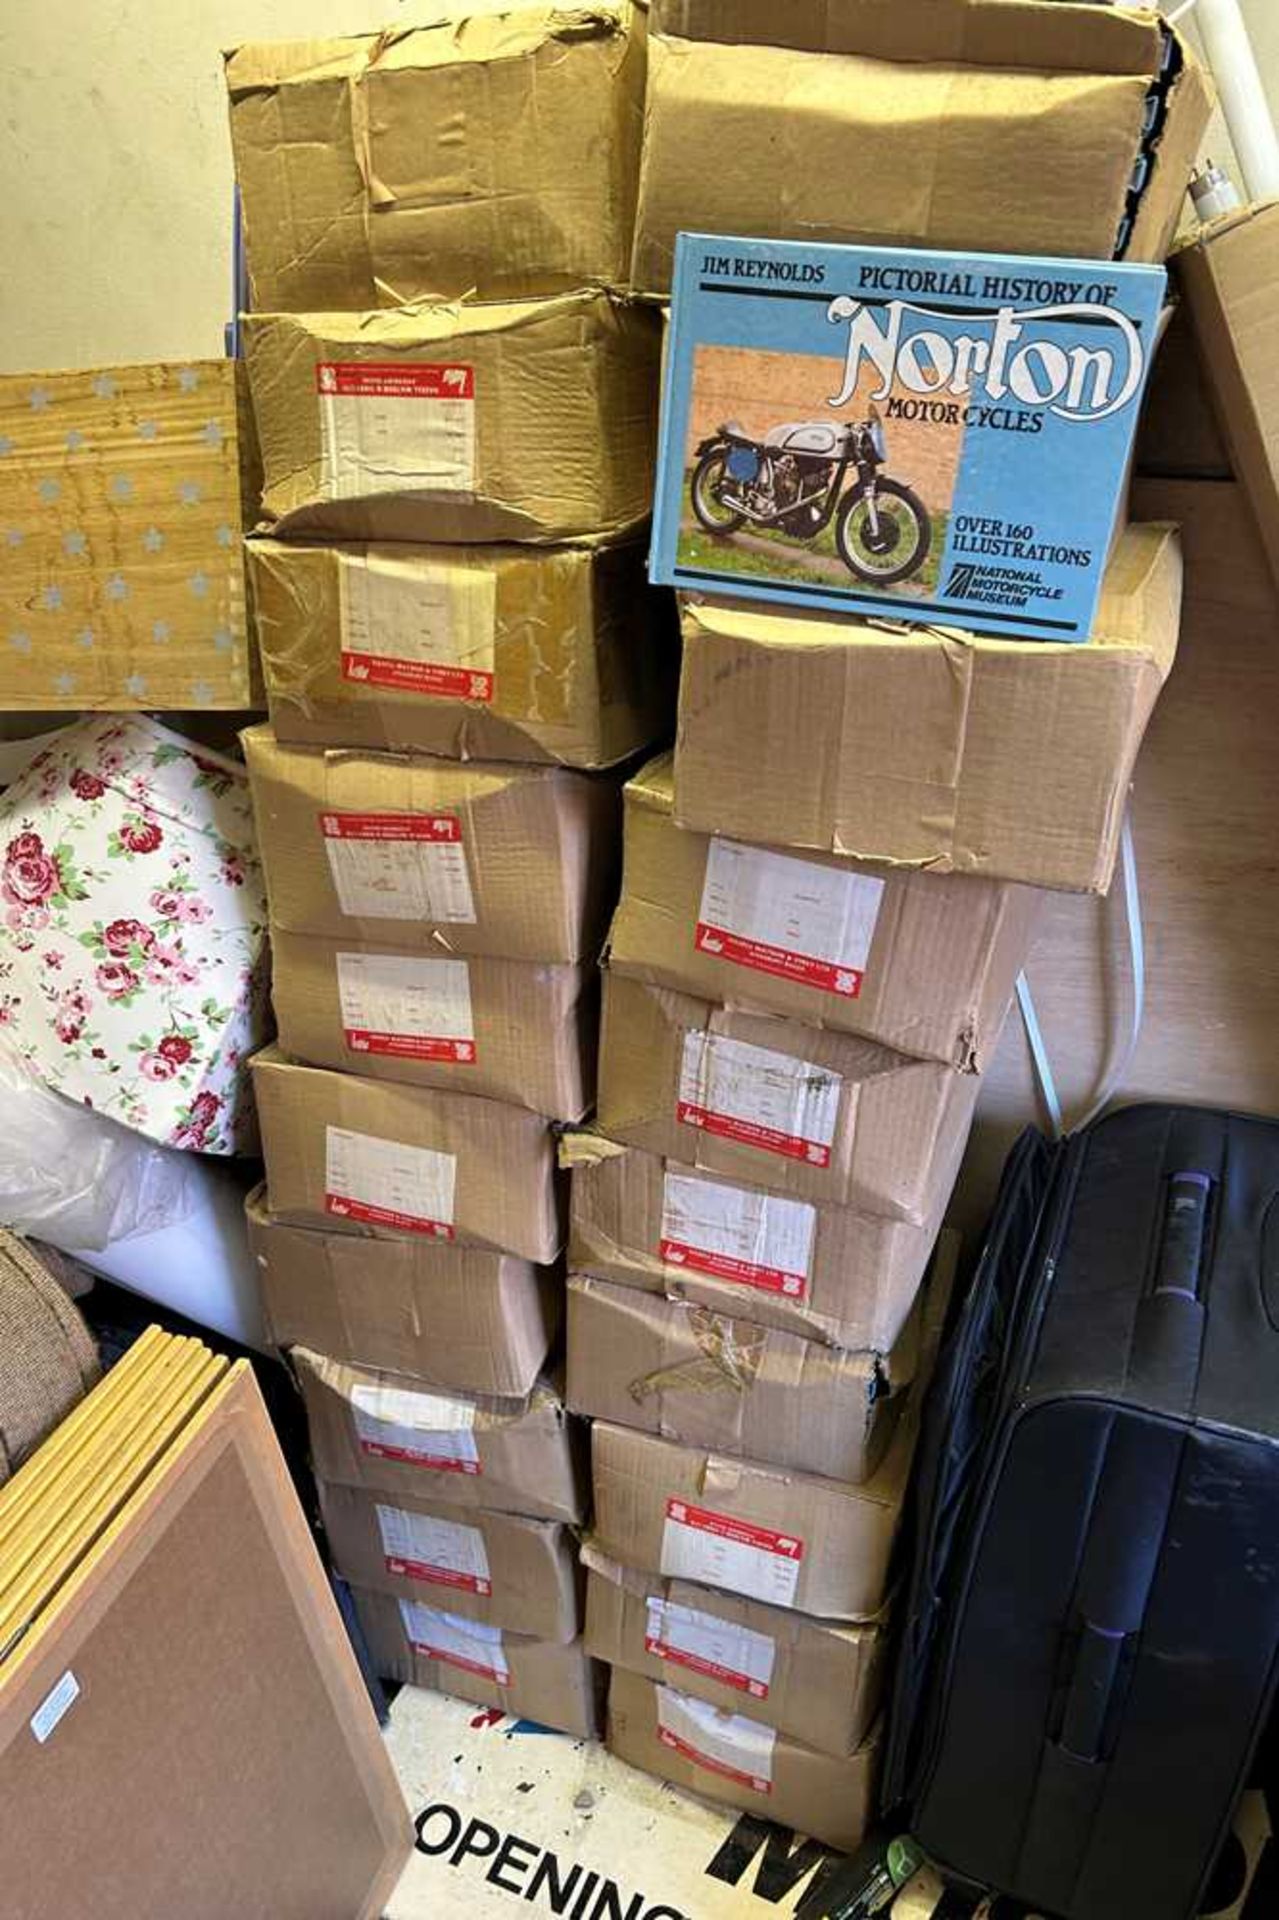 50 Boxes of Books 'Pictorial History of Norton Motorcycles' by Jim Reynolds - Image 3 of 3